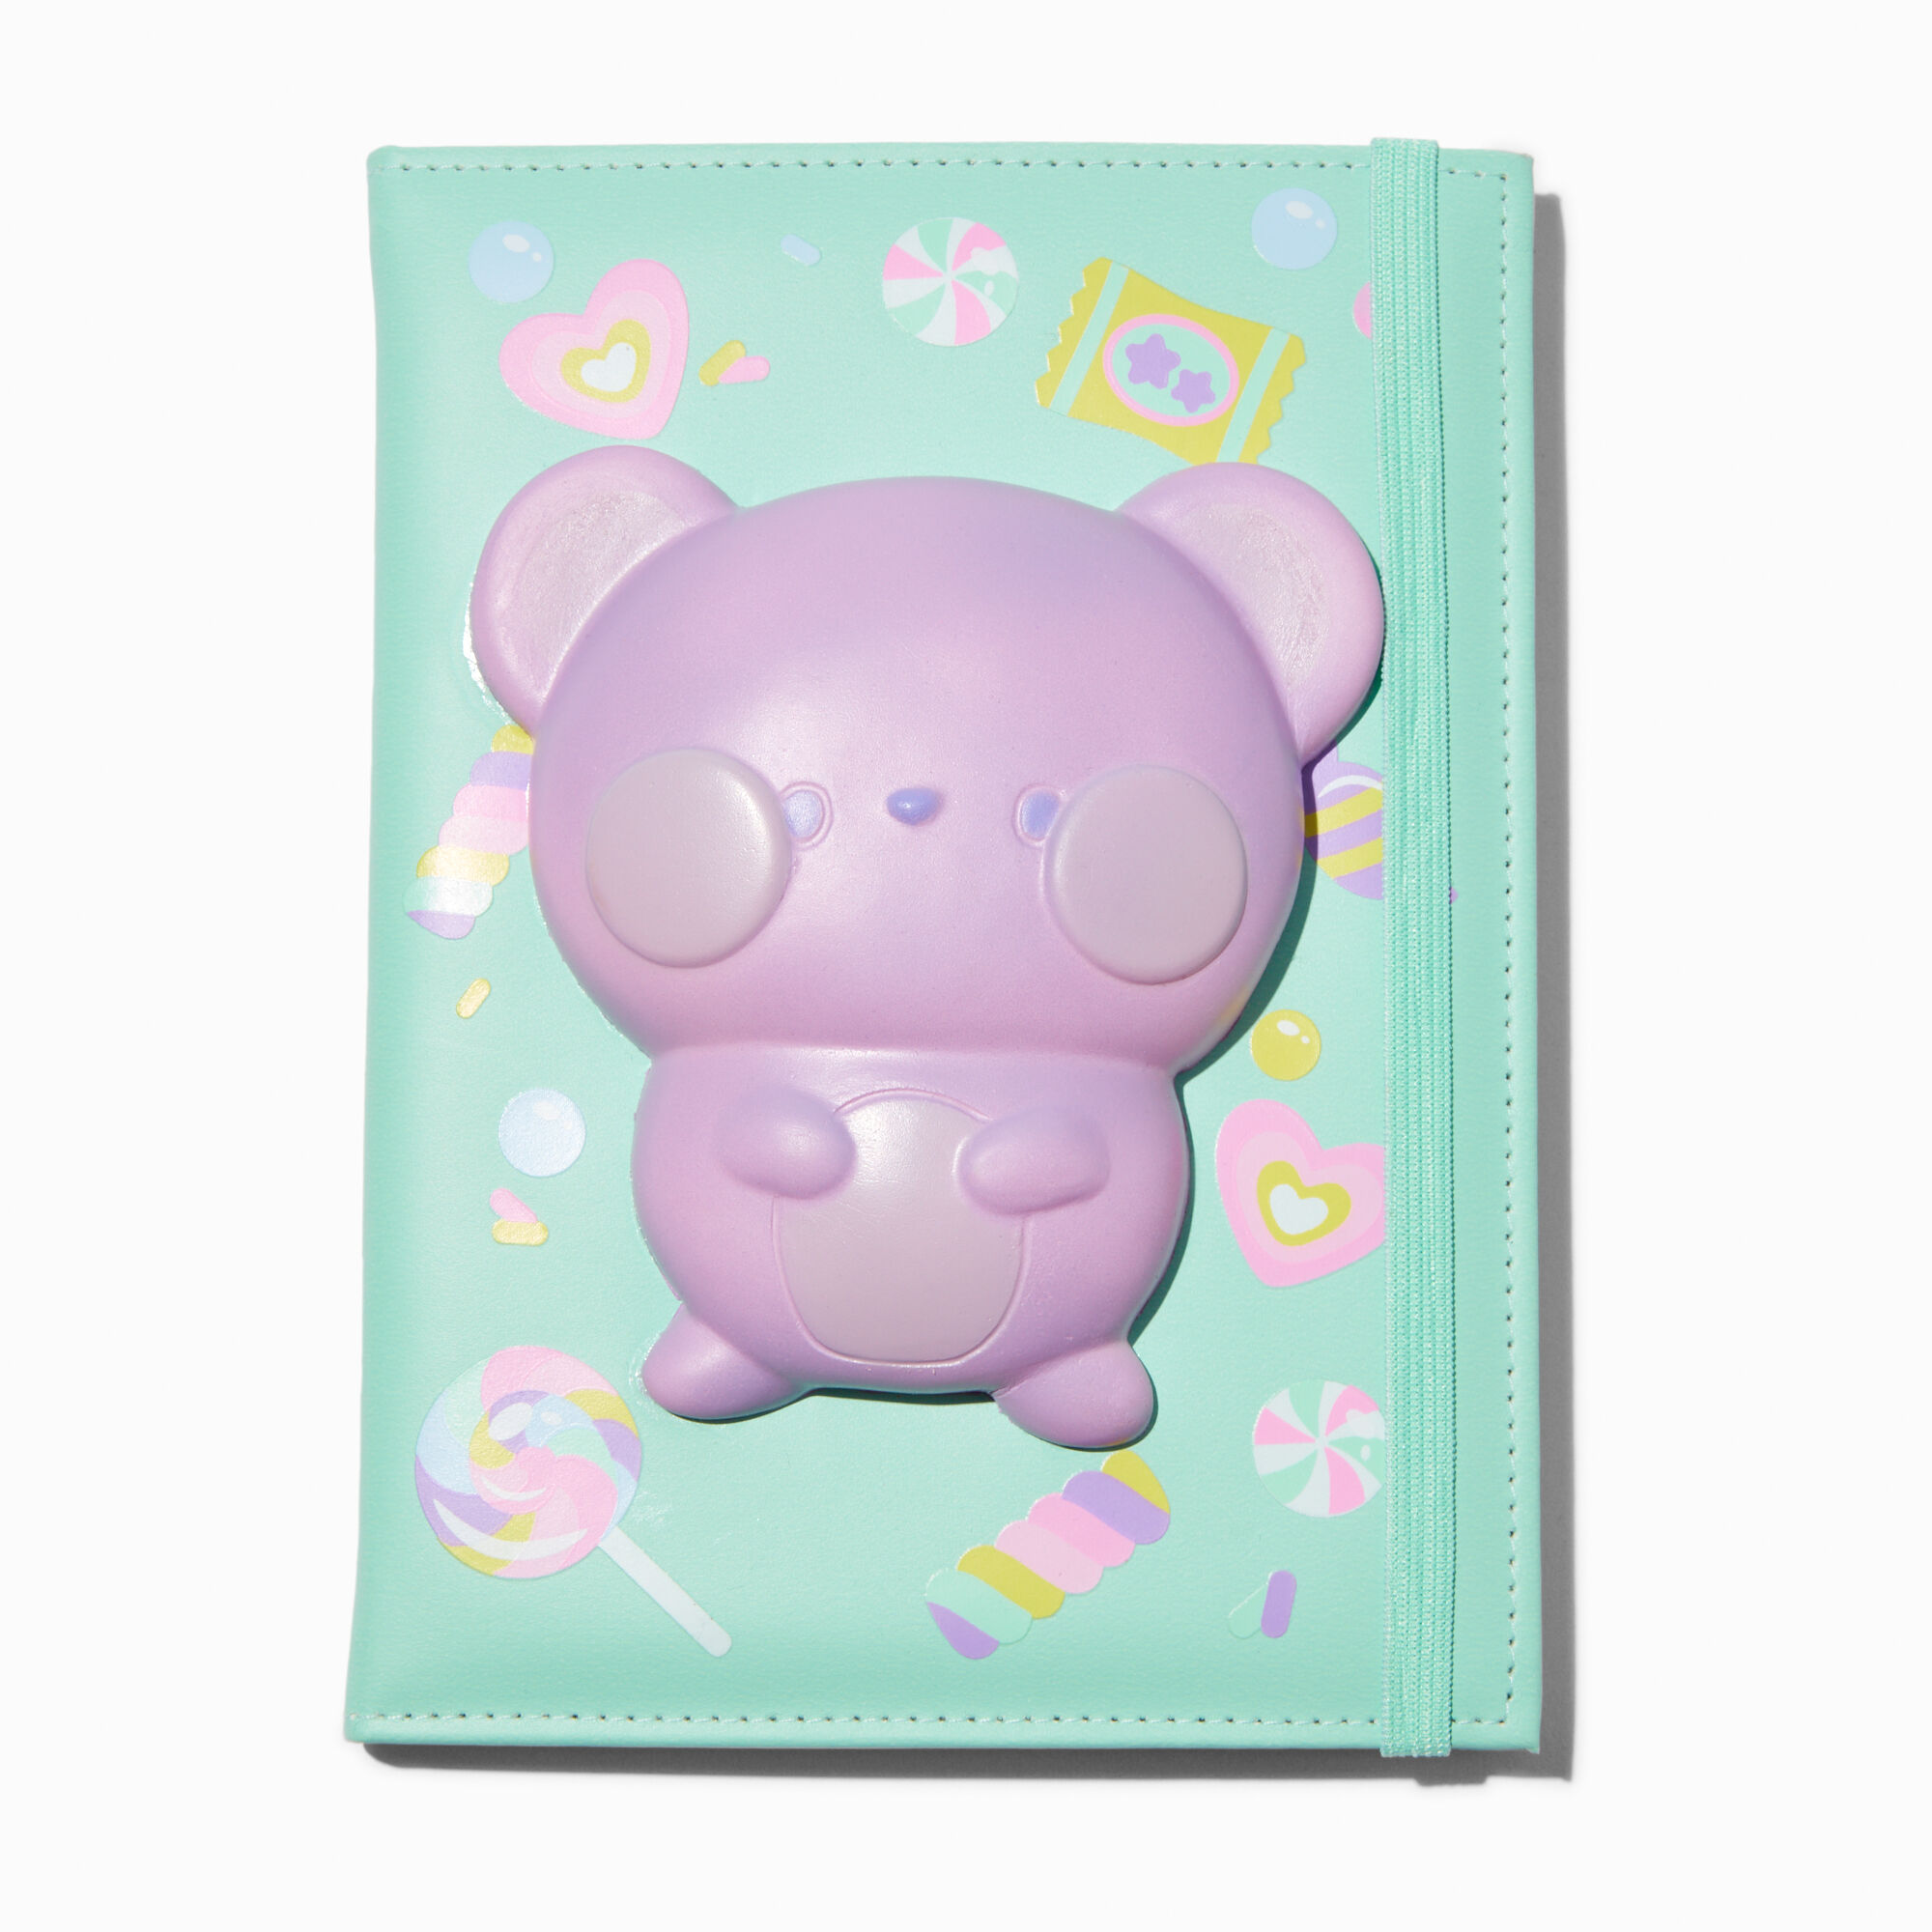 claire's purple bear squish diary